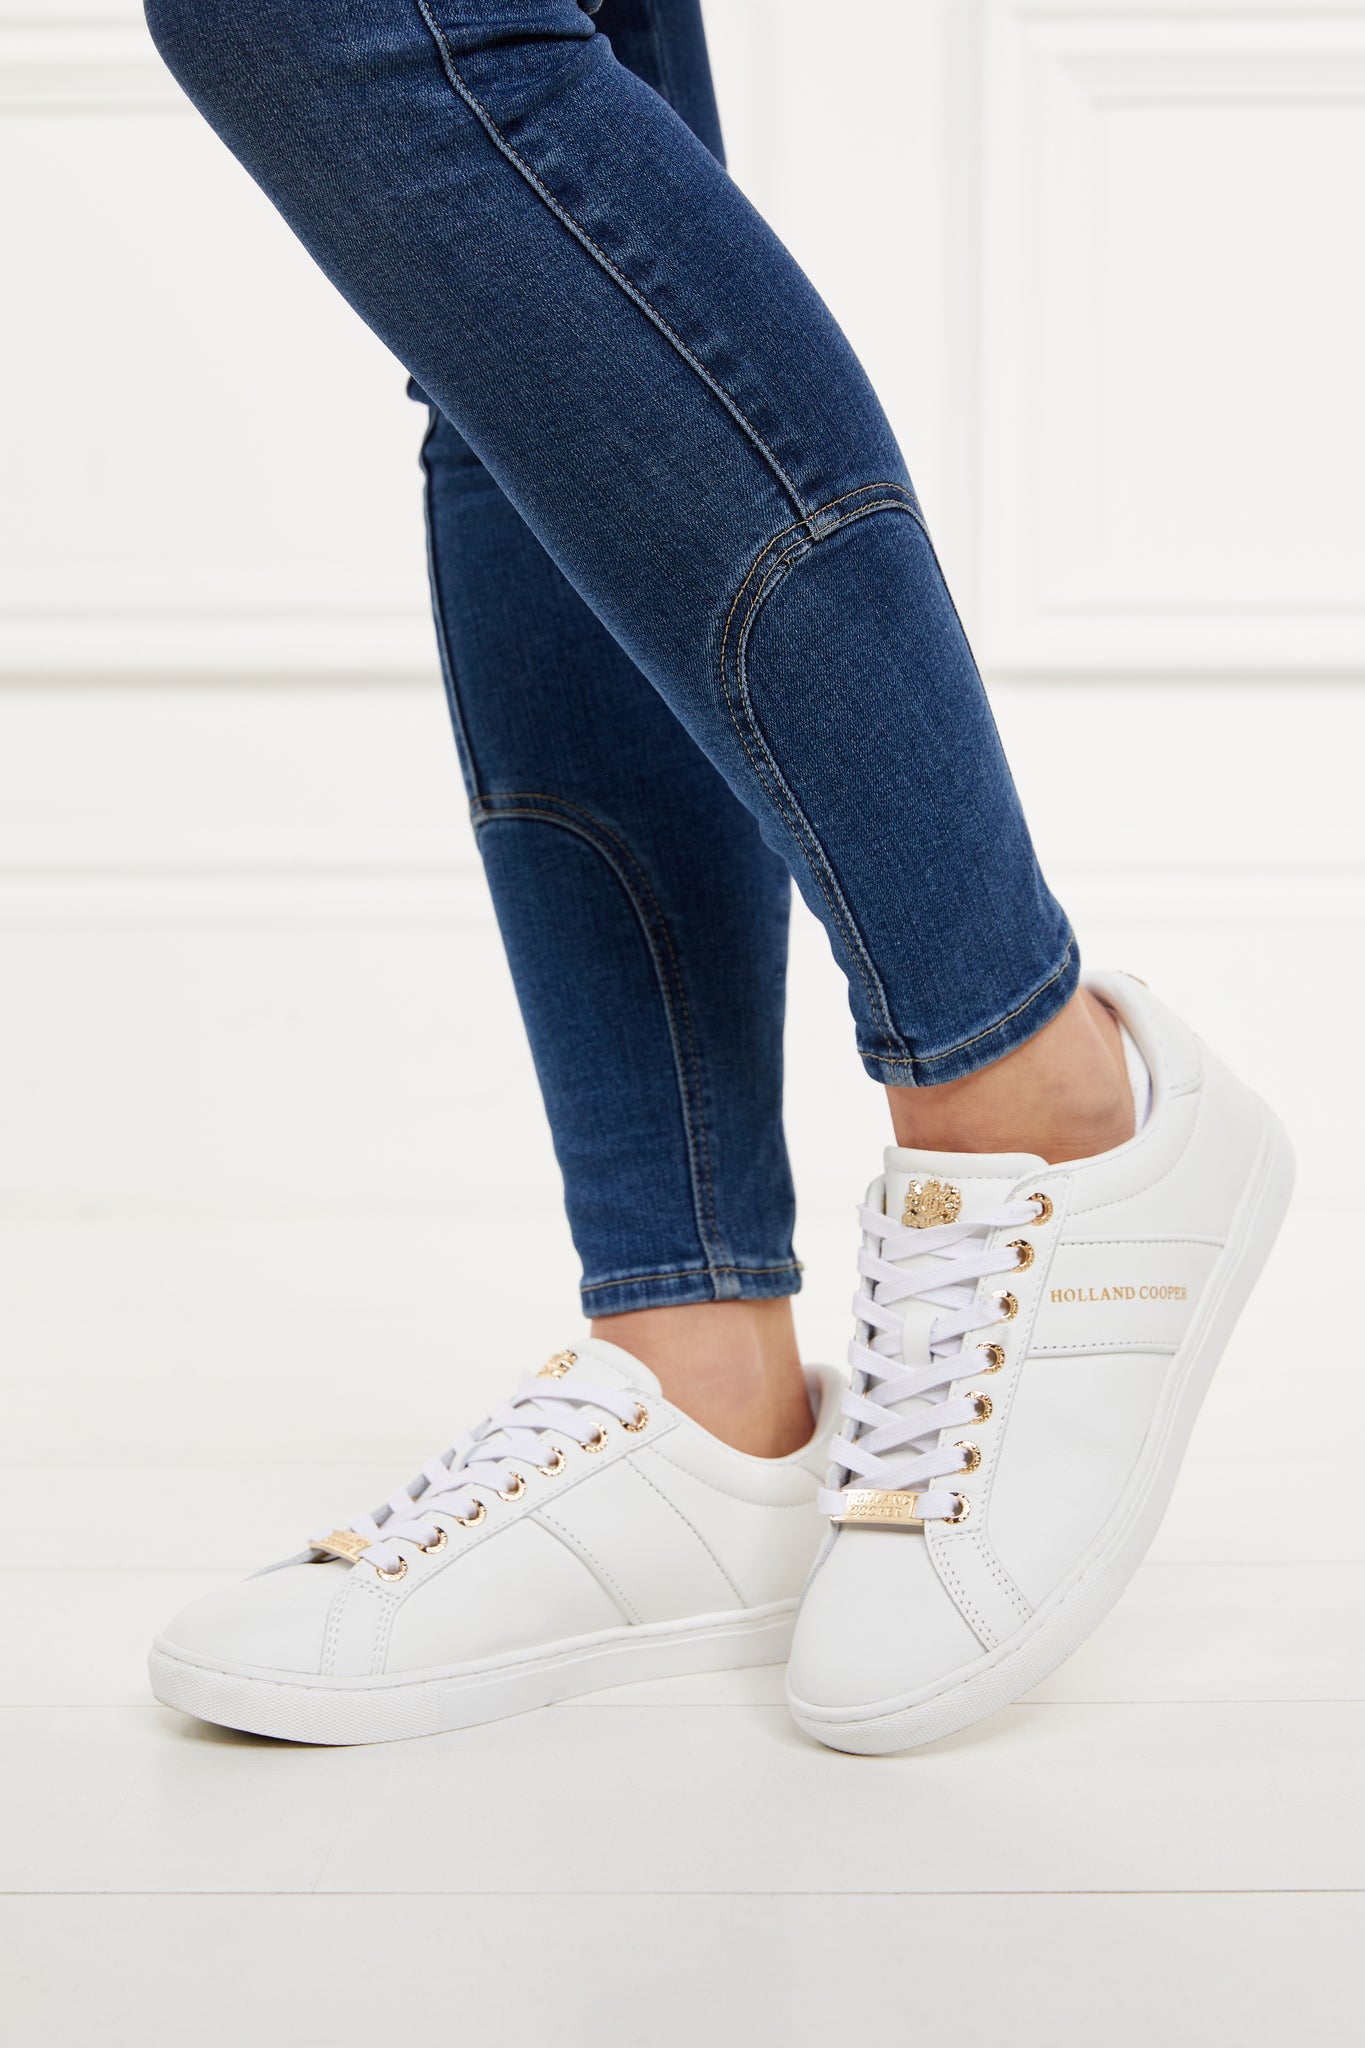 white leather trainers with white laces detailed with gold foil branding on the side and gold hardware. Worn with denim skinny jeans.